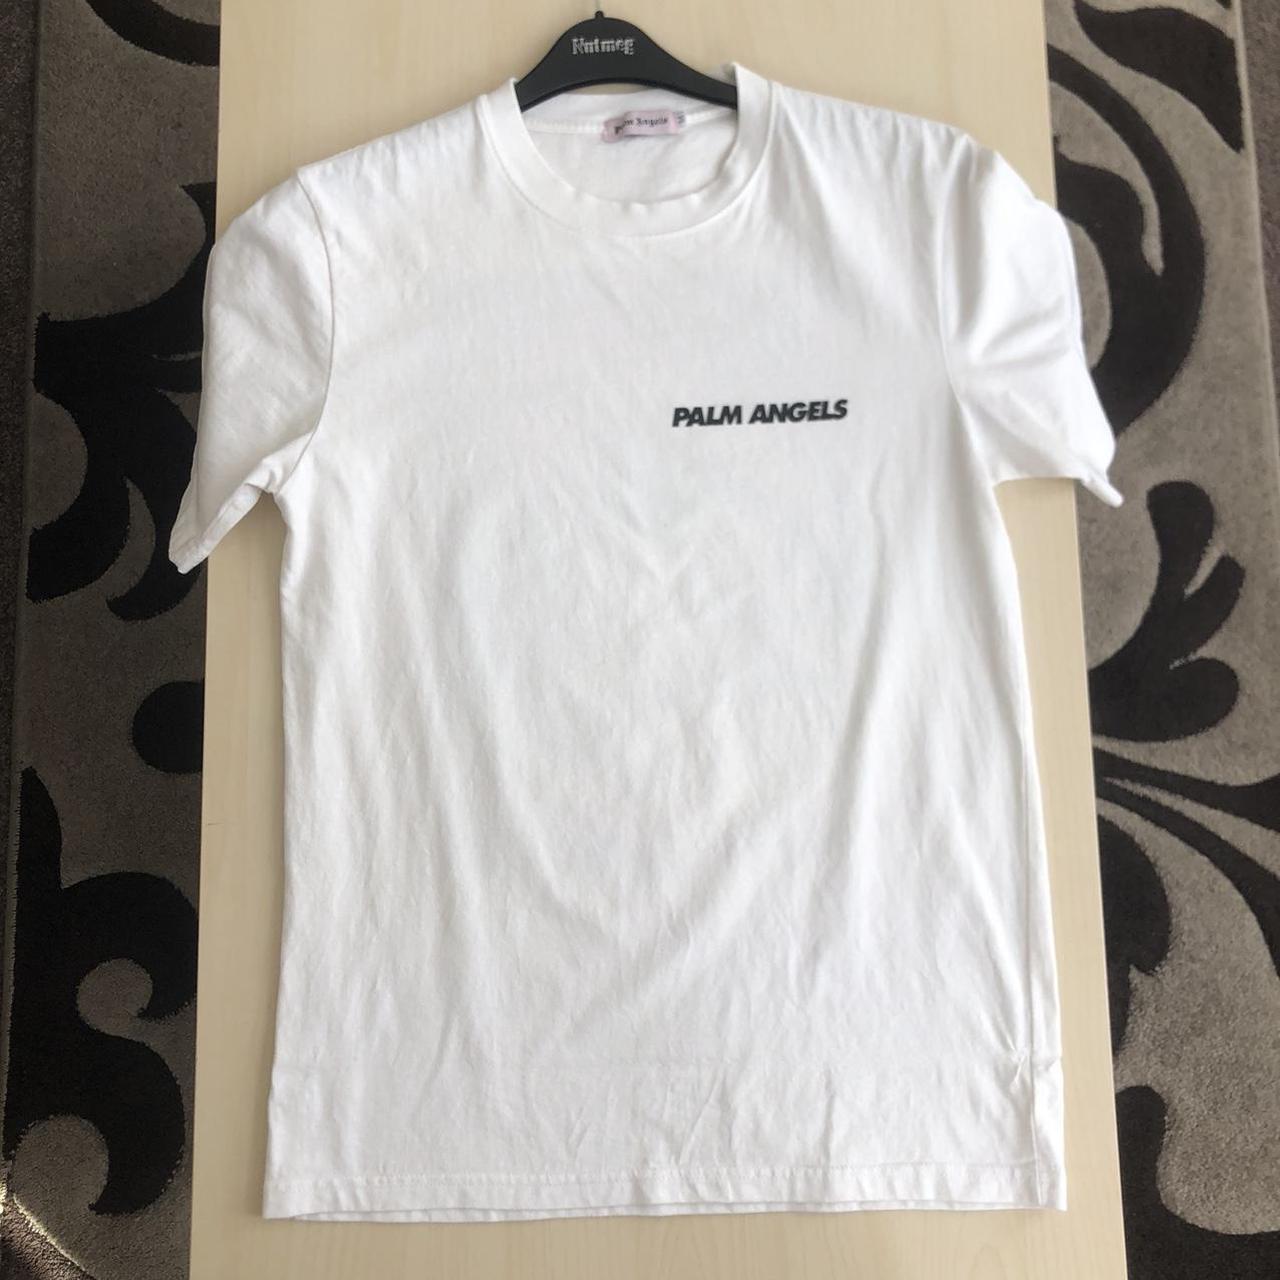 Palm Angels White T-Shirt in good condition - Depop